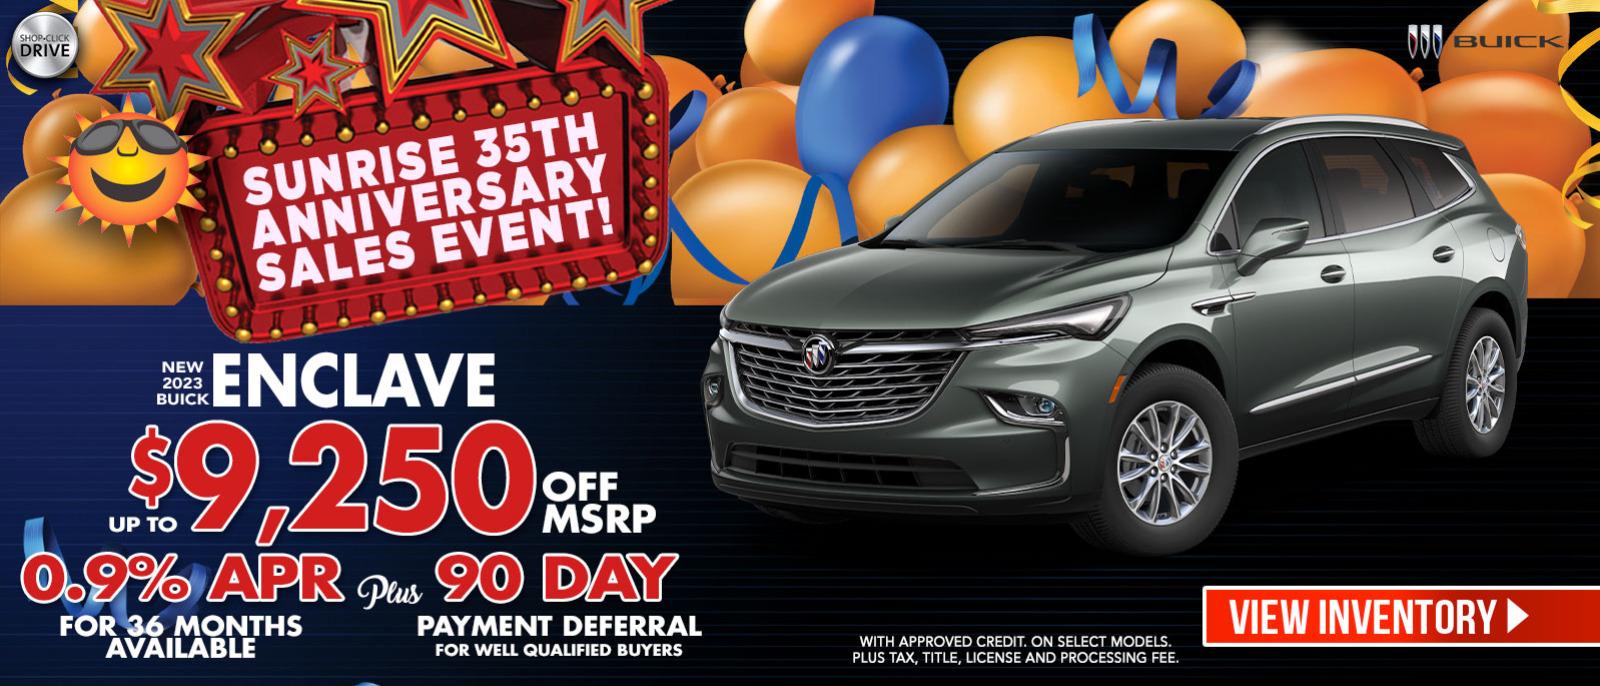 New Buick Enclave - Up to $8250 Off MSRP